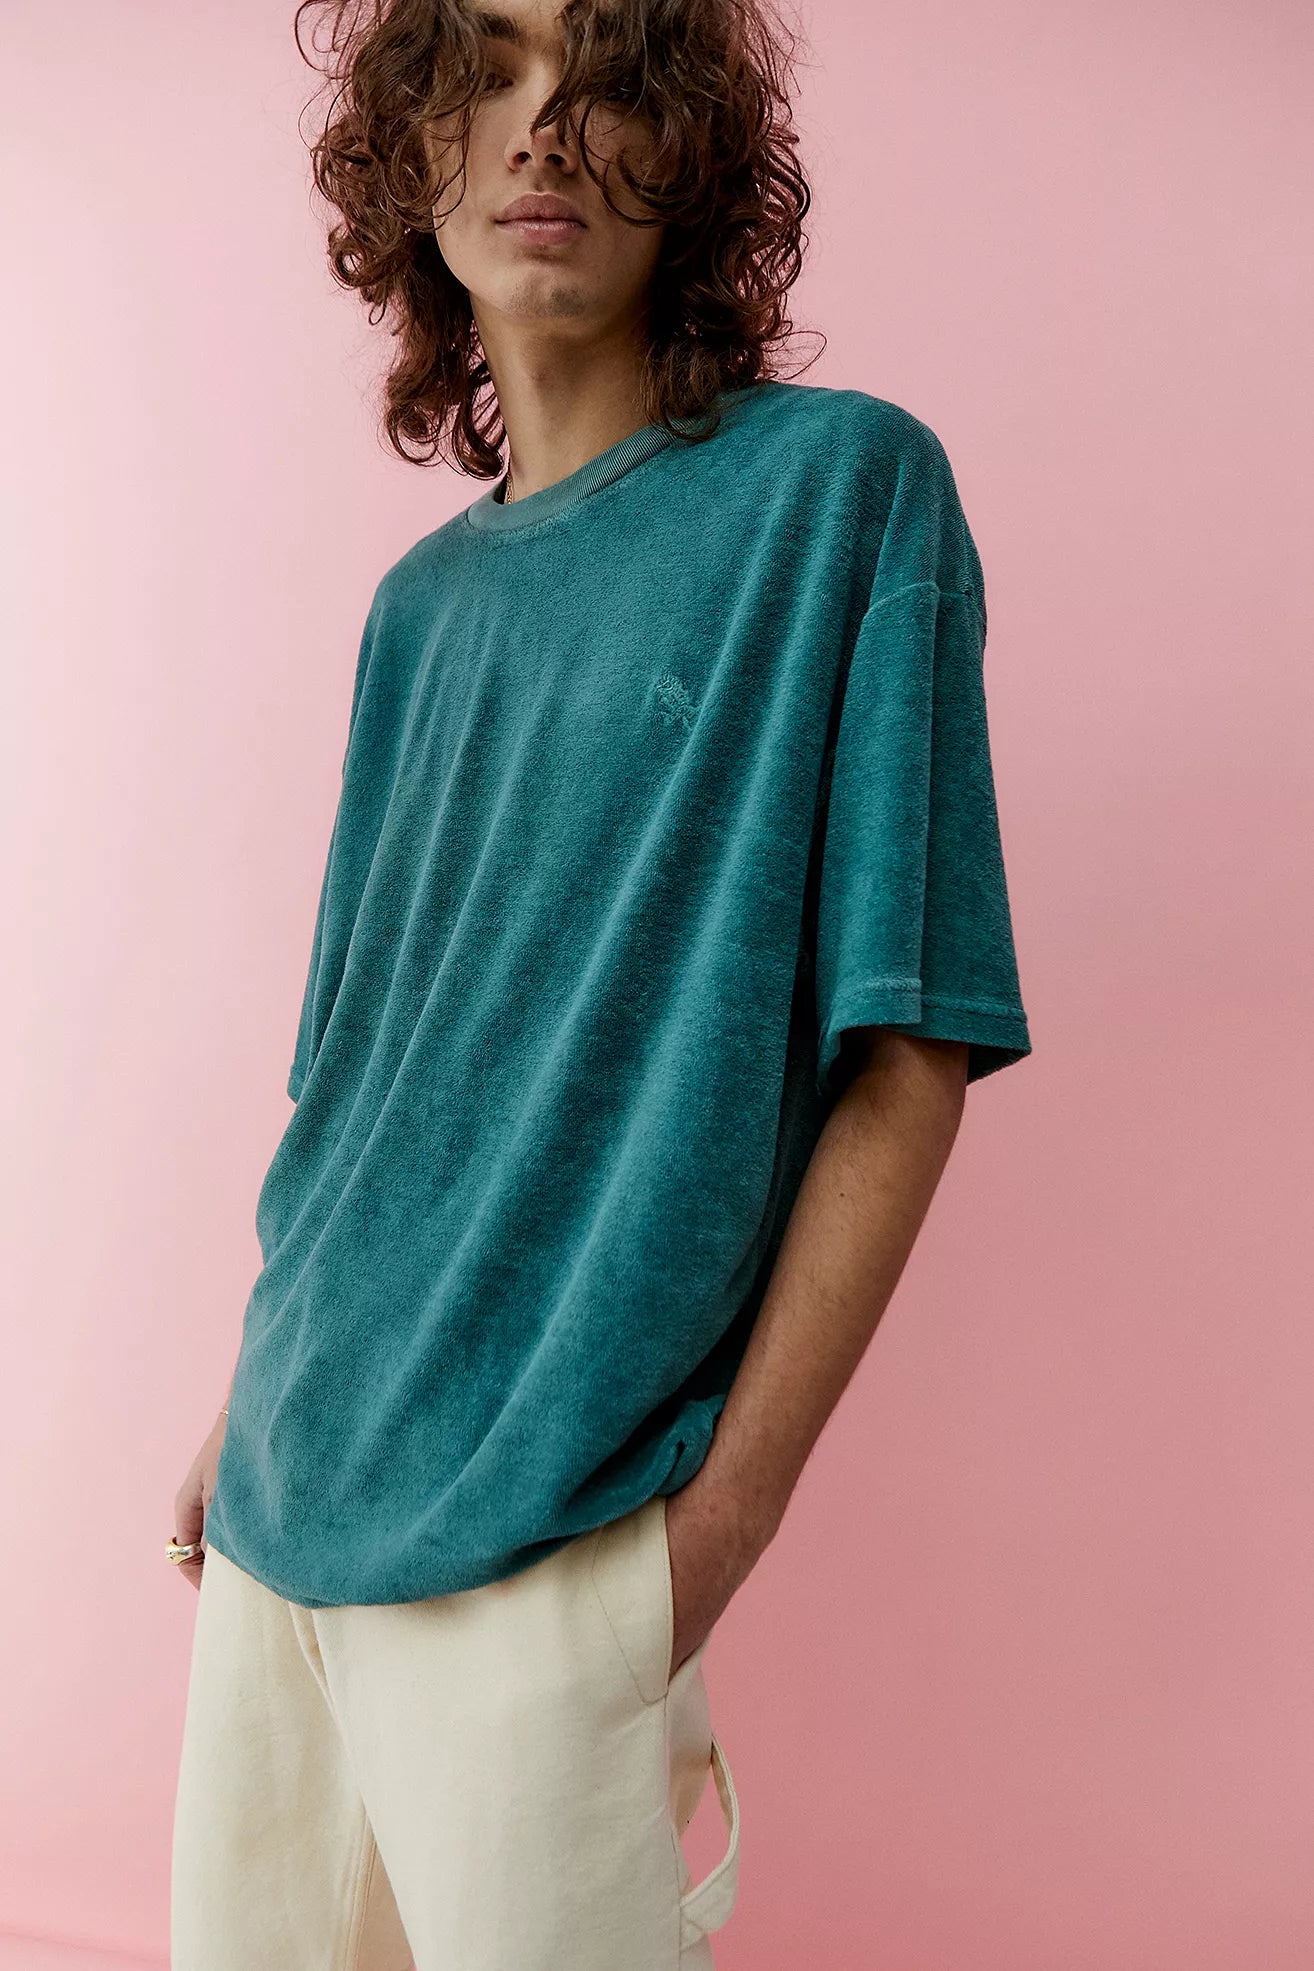 Urban outfitters Nomad Teal Recycled Toweling T-shirt